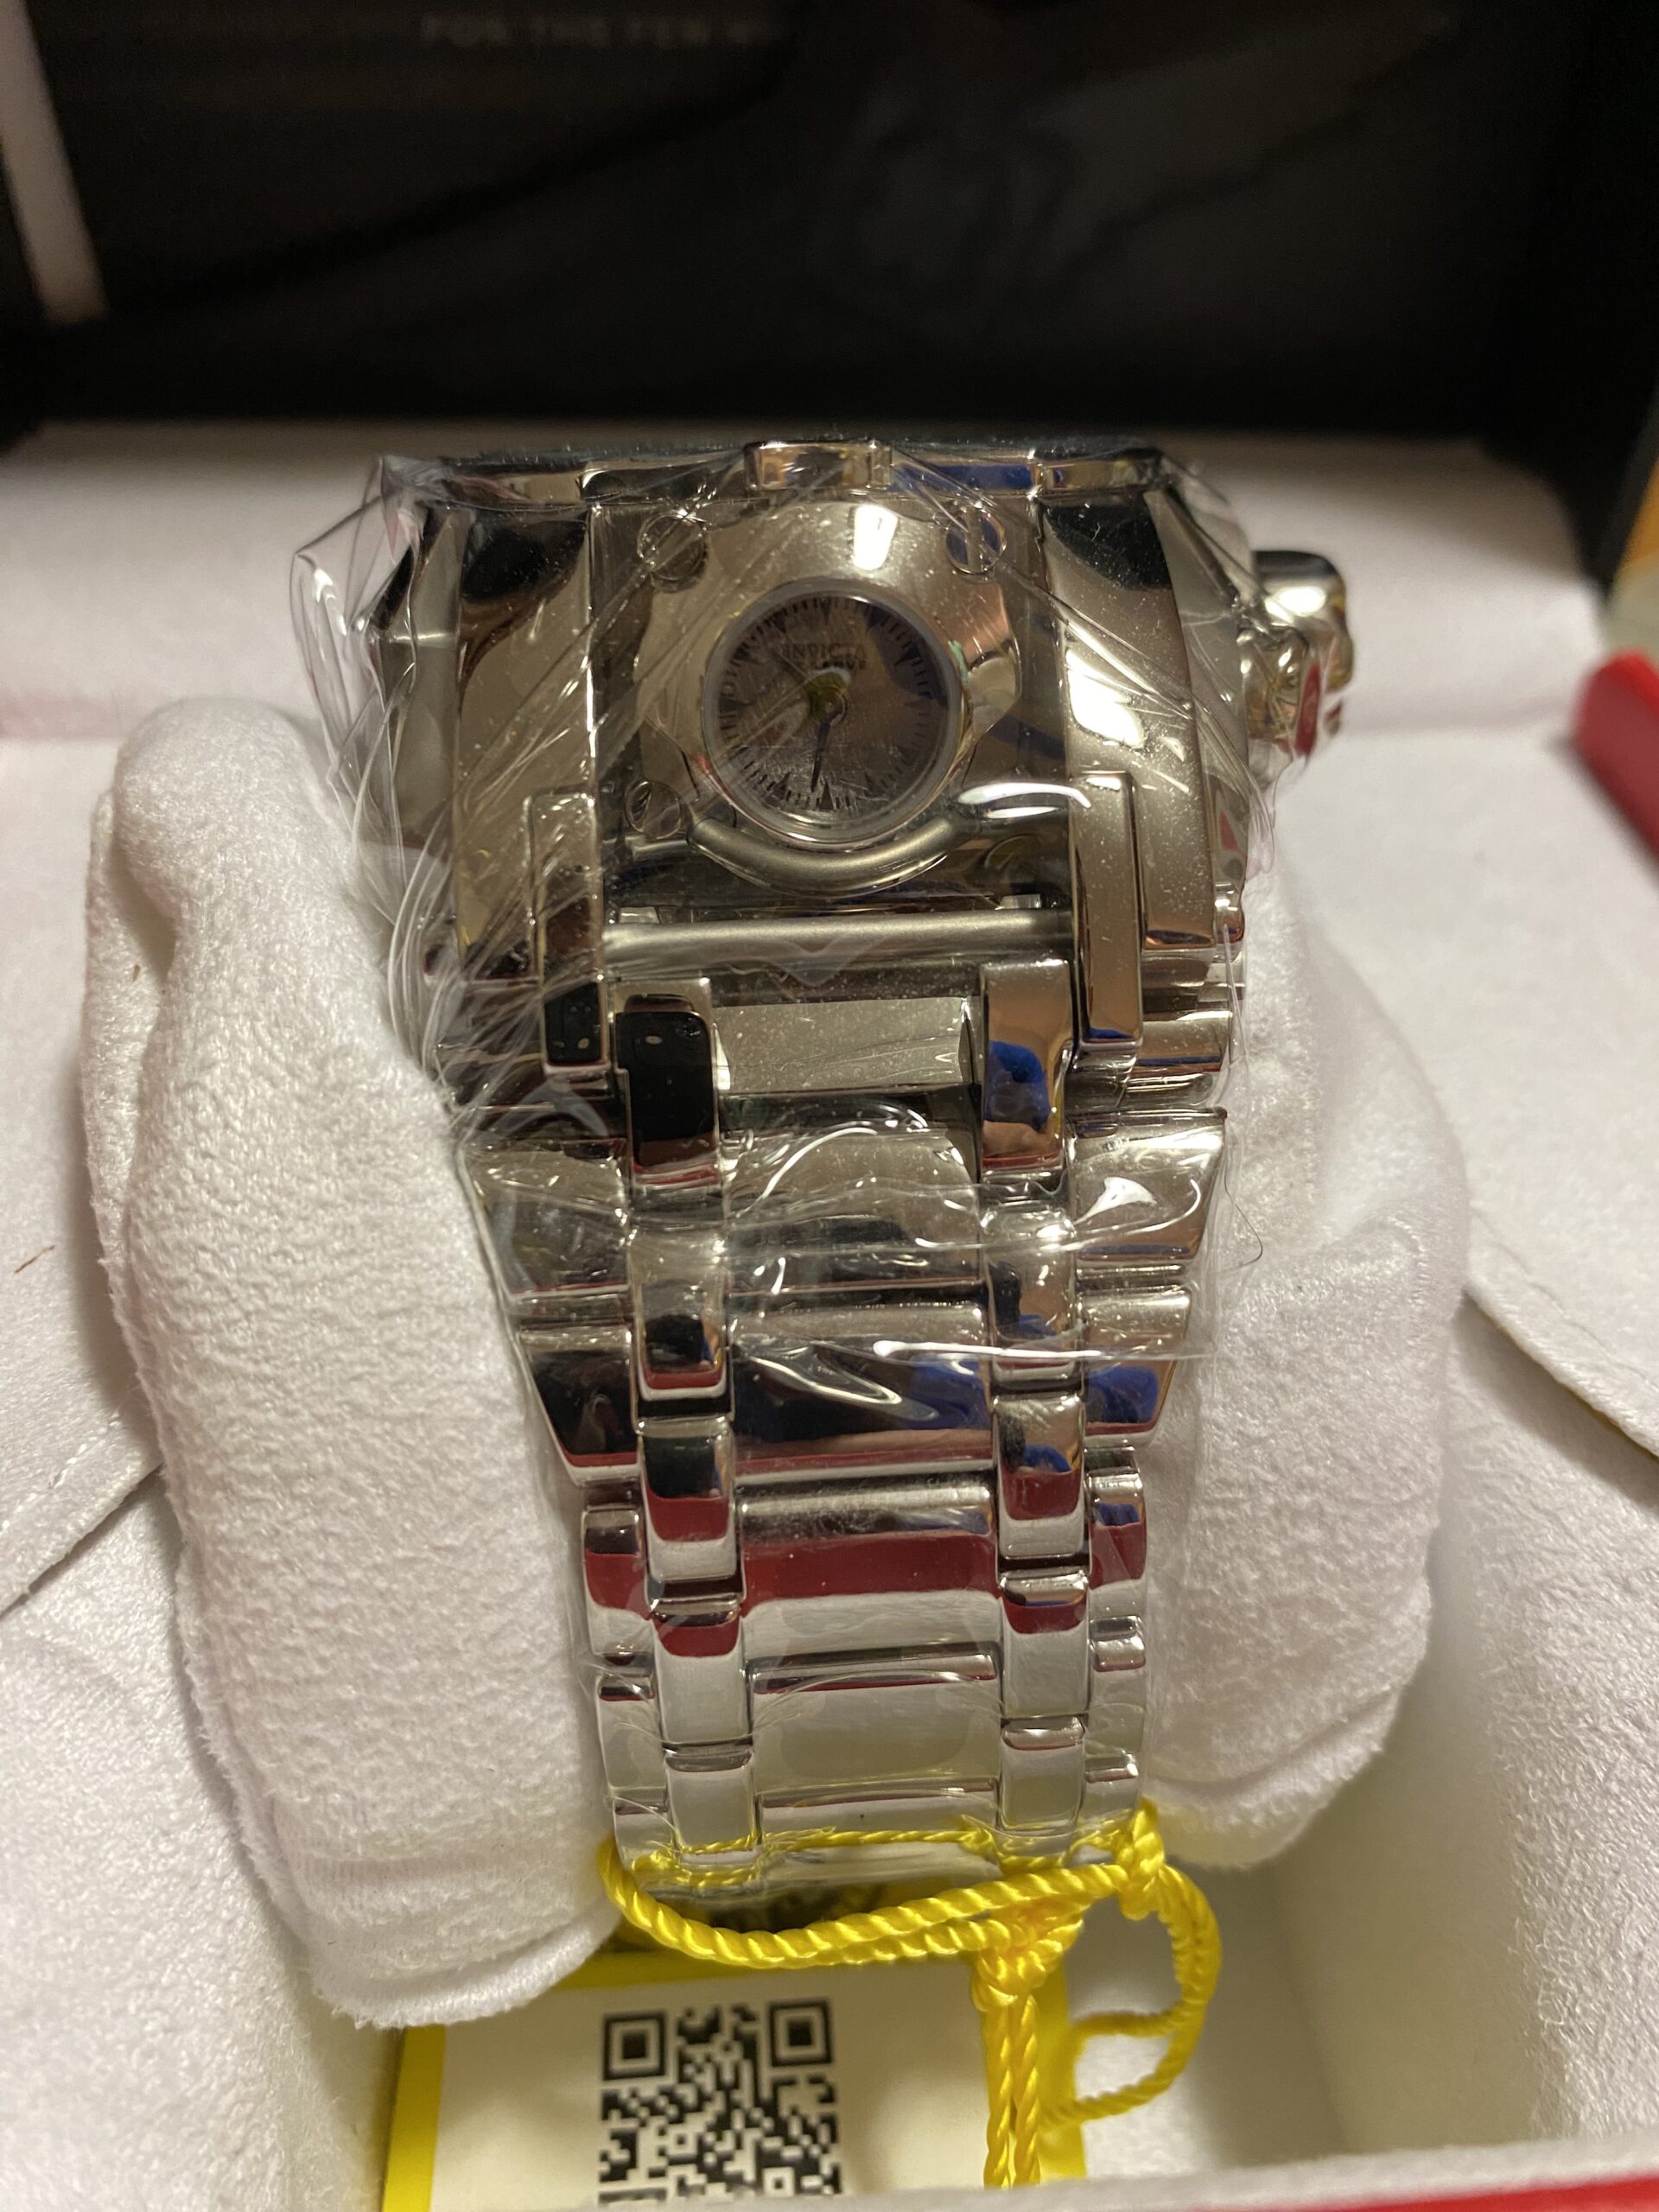 Brand New Invicta Reserve Bolt Zeus Watch - The Consignment King | Online Store